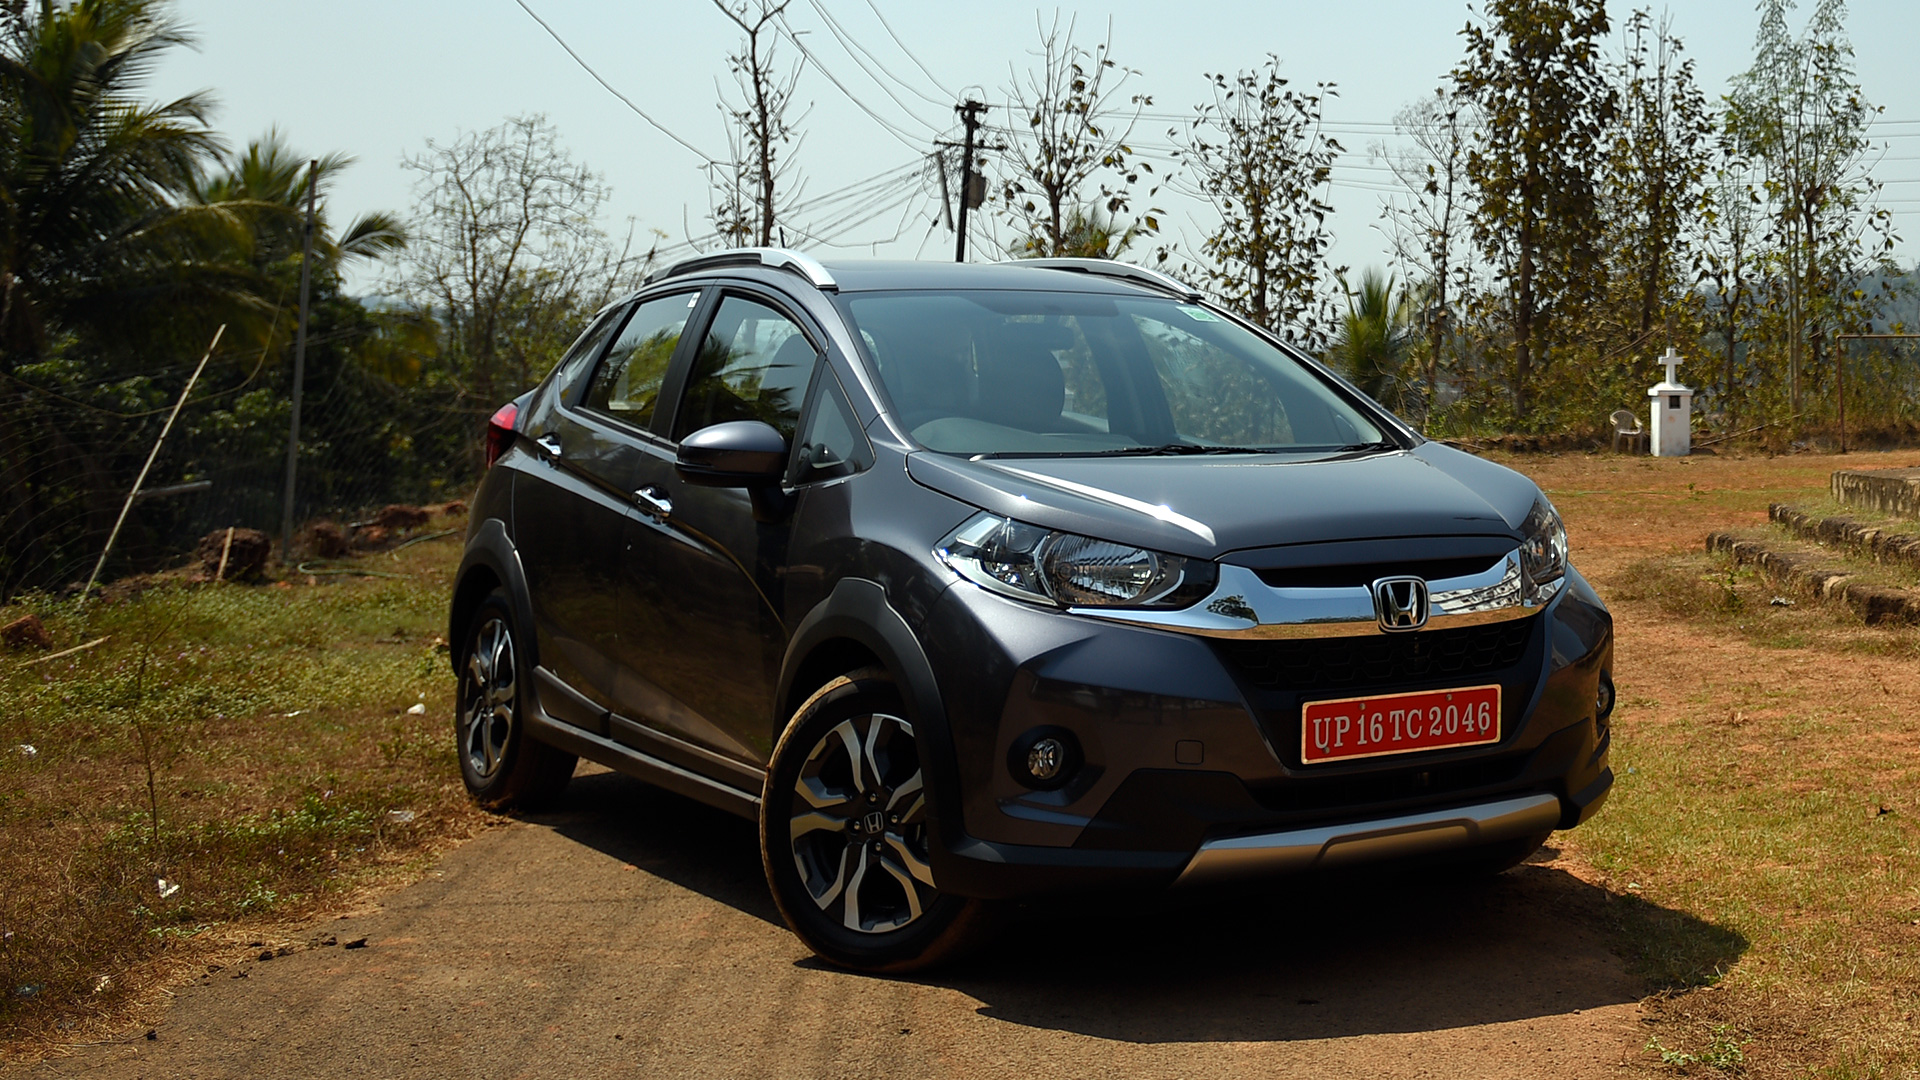 Honda Wr V Petrol Vx Mt Price Mileage Reviews Specification Gallery Overdrive